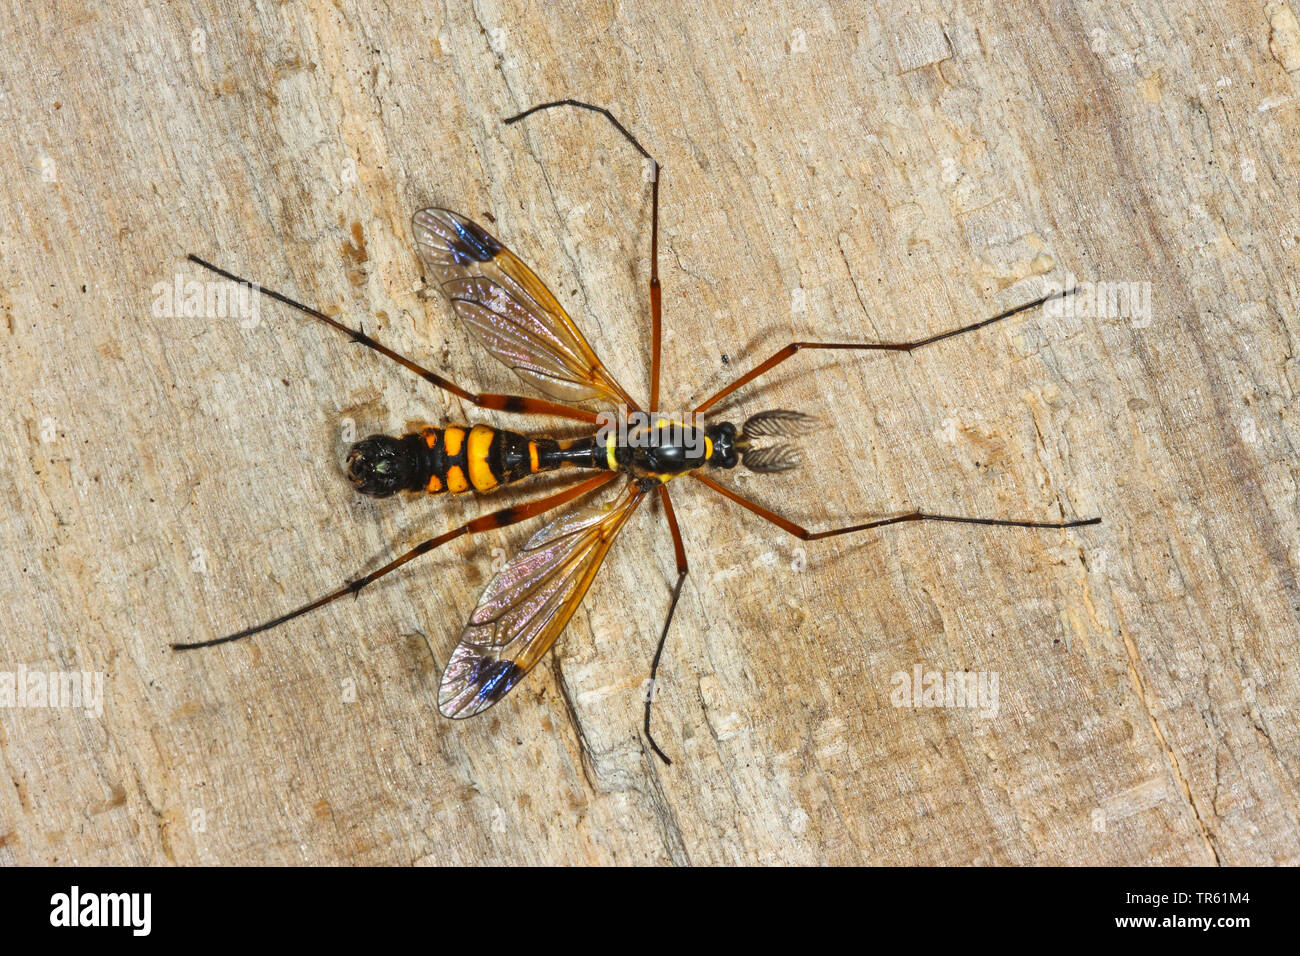 Crane Fly, Cranefly (Ctenophora ornata, Cnemoncosis ornata, Flabellifera ornata), male with ctenoid feelers on wood, view from above, Germany Stock Photo